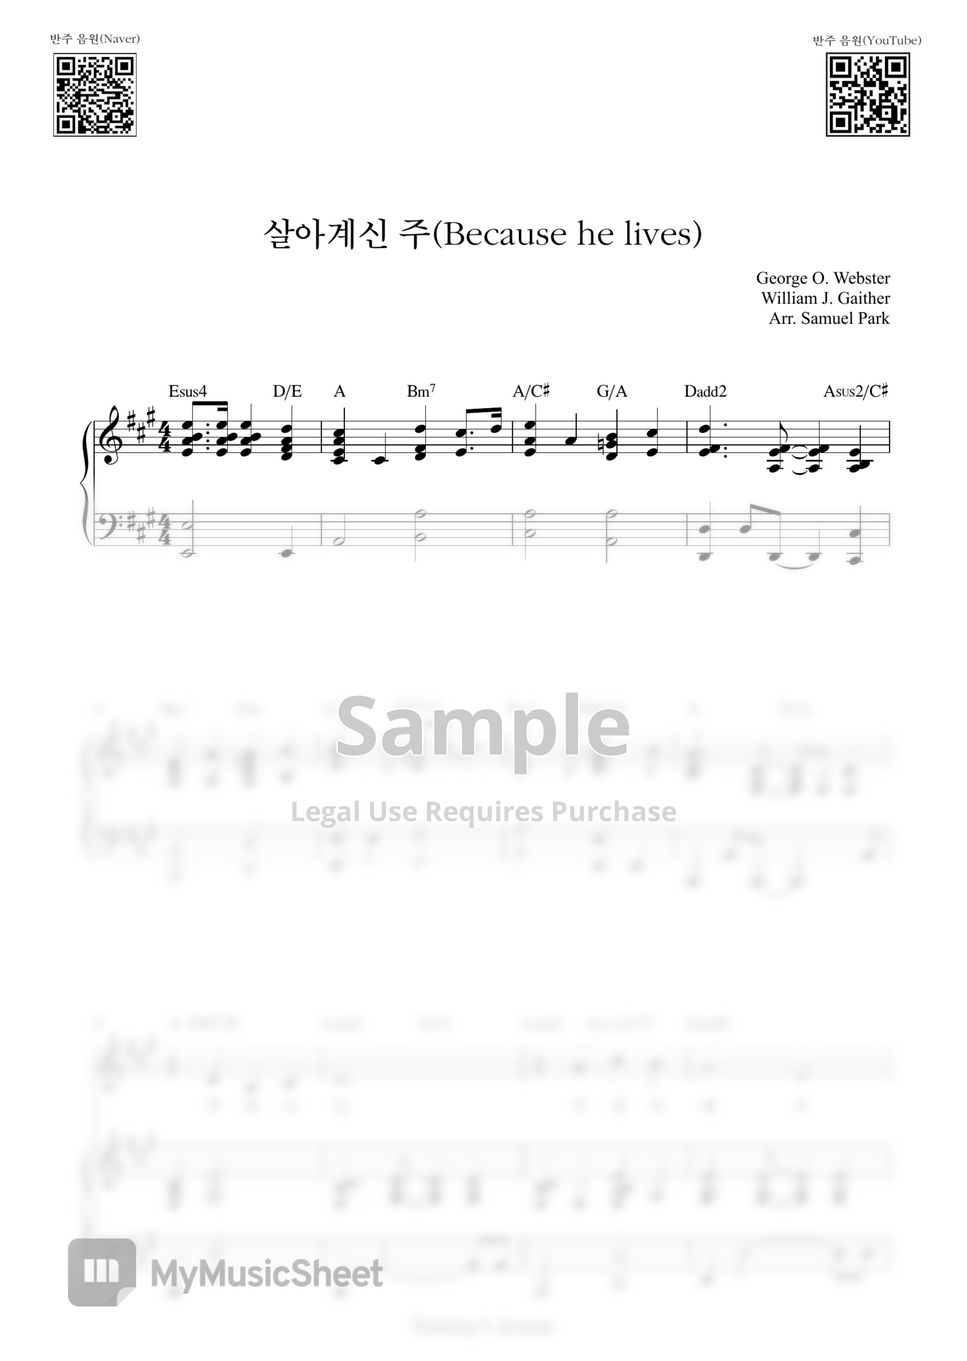 George O. Webster & William J. Gaither - 살아계신 주(Because he lives) (Piano Cover) by Samuel Park